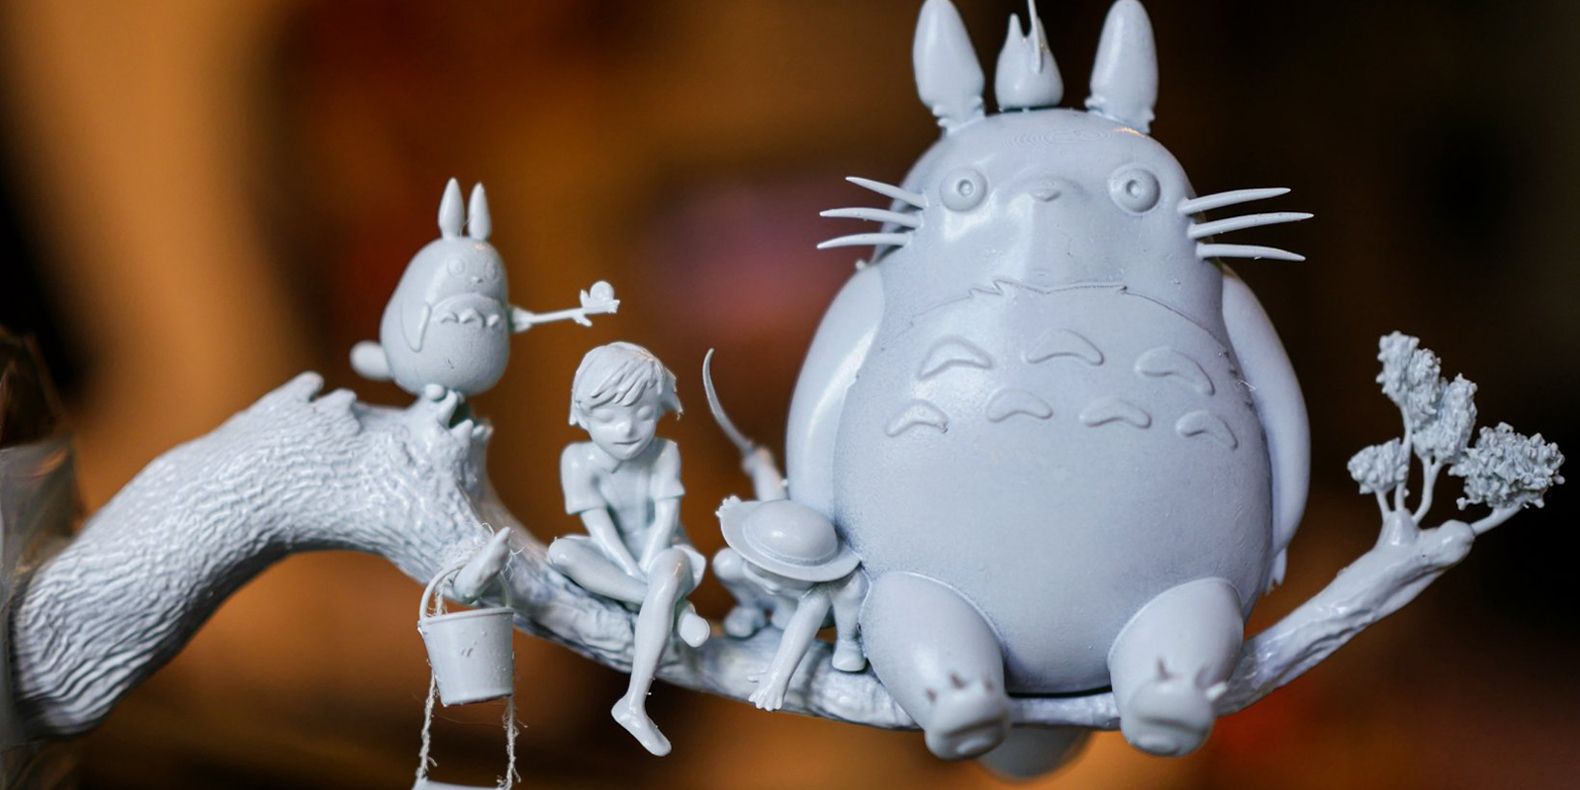 Find here a selection of the best 3D models from the Studio Ghibli's universe